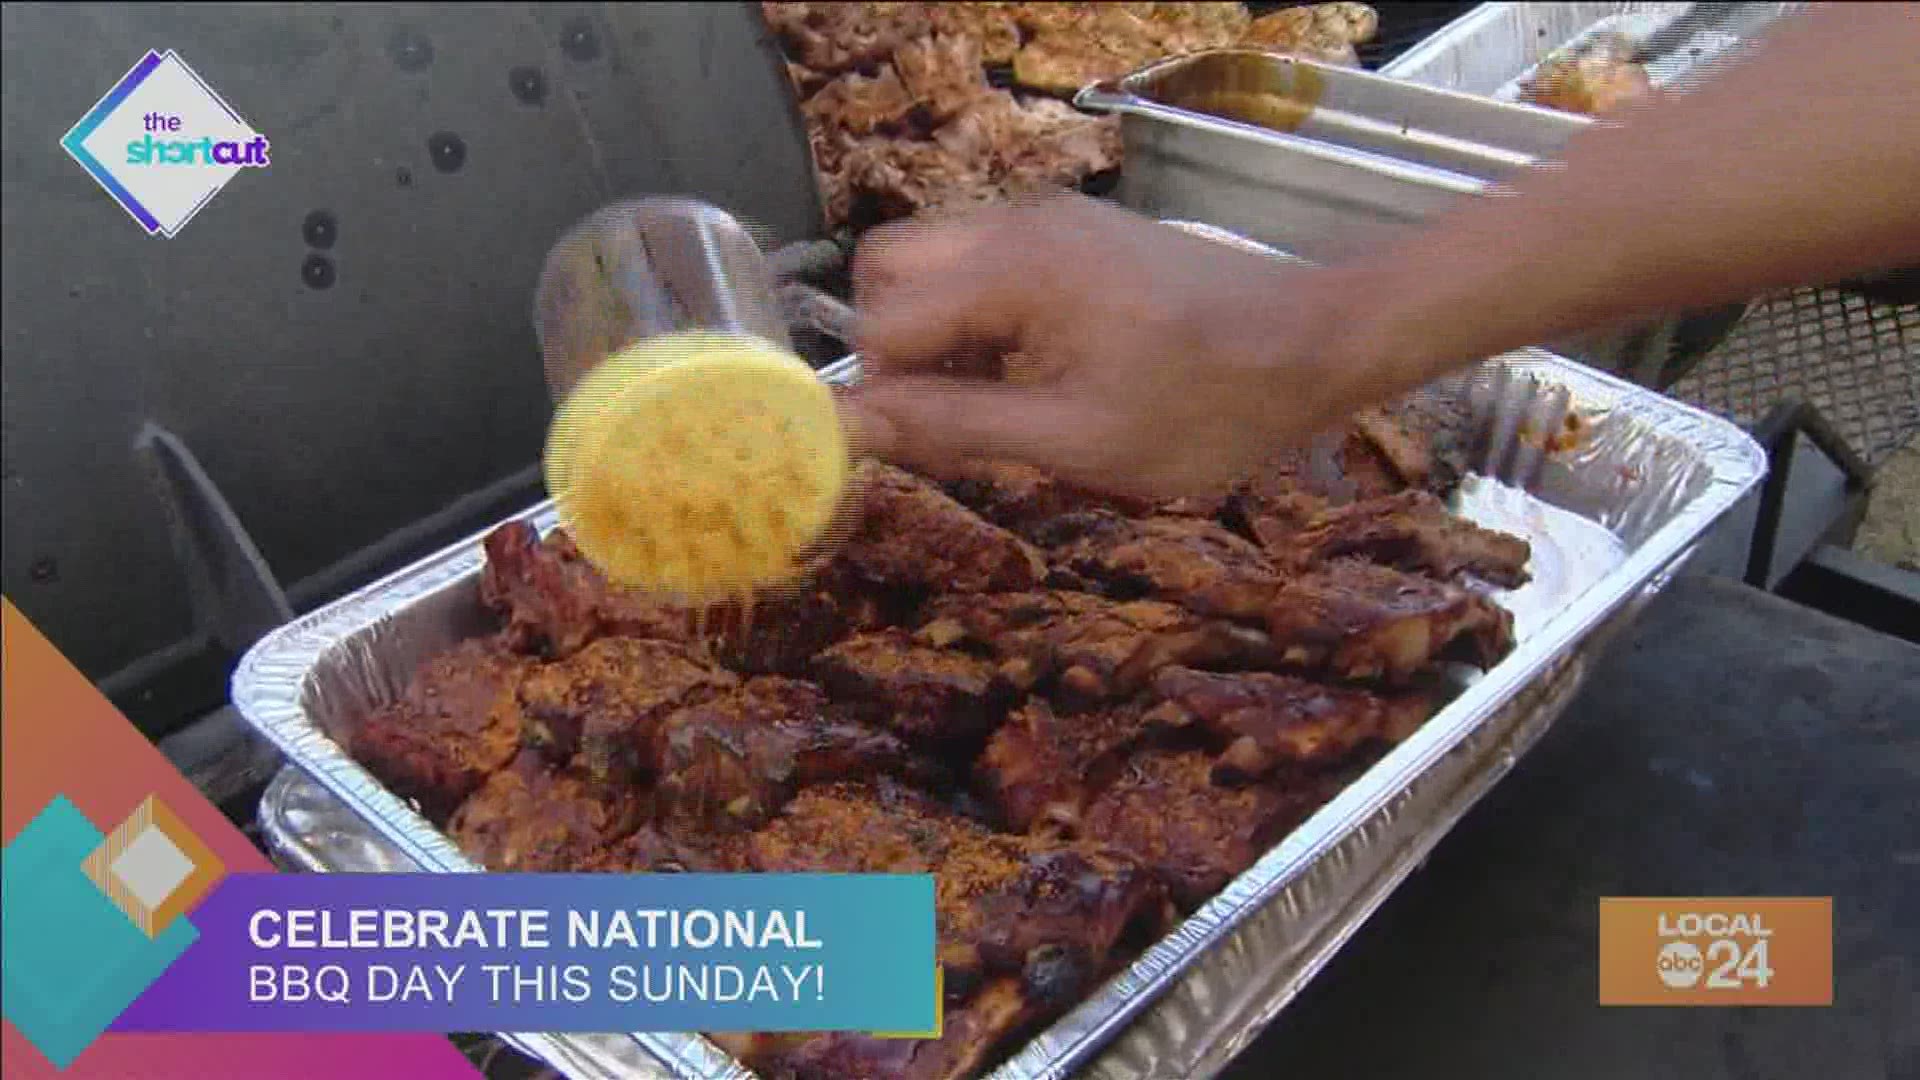 Join Sydney Neely on "The Shortcut" as we dive deep into the meat of one of America's most beloved, Southern traditions, Memphis National BBQ Day!